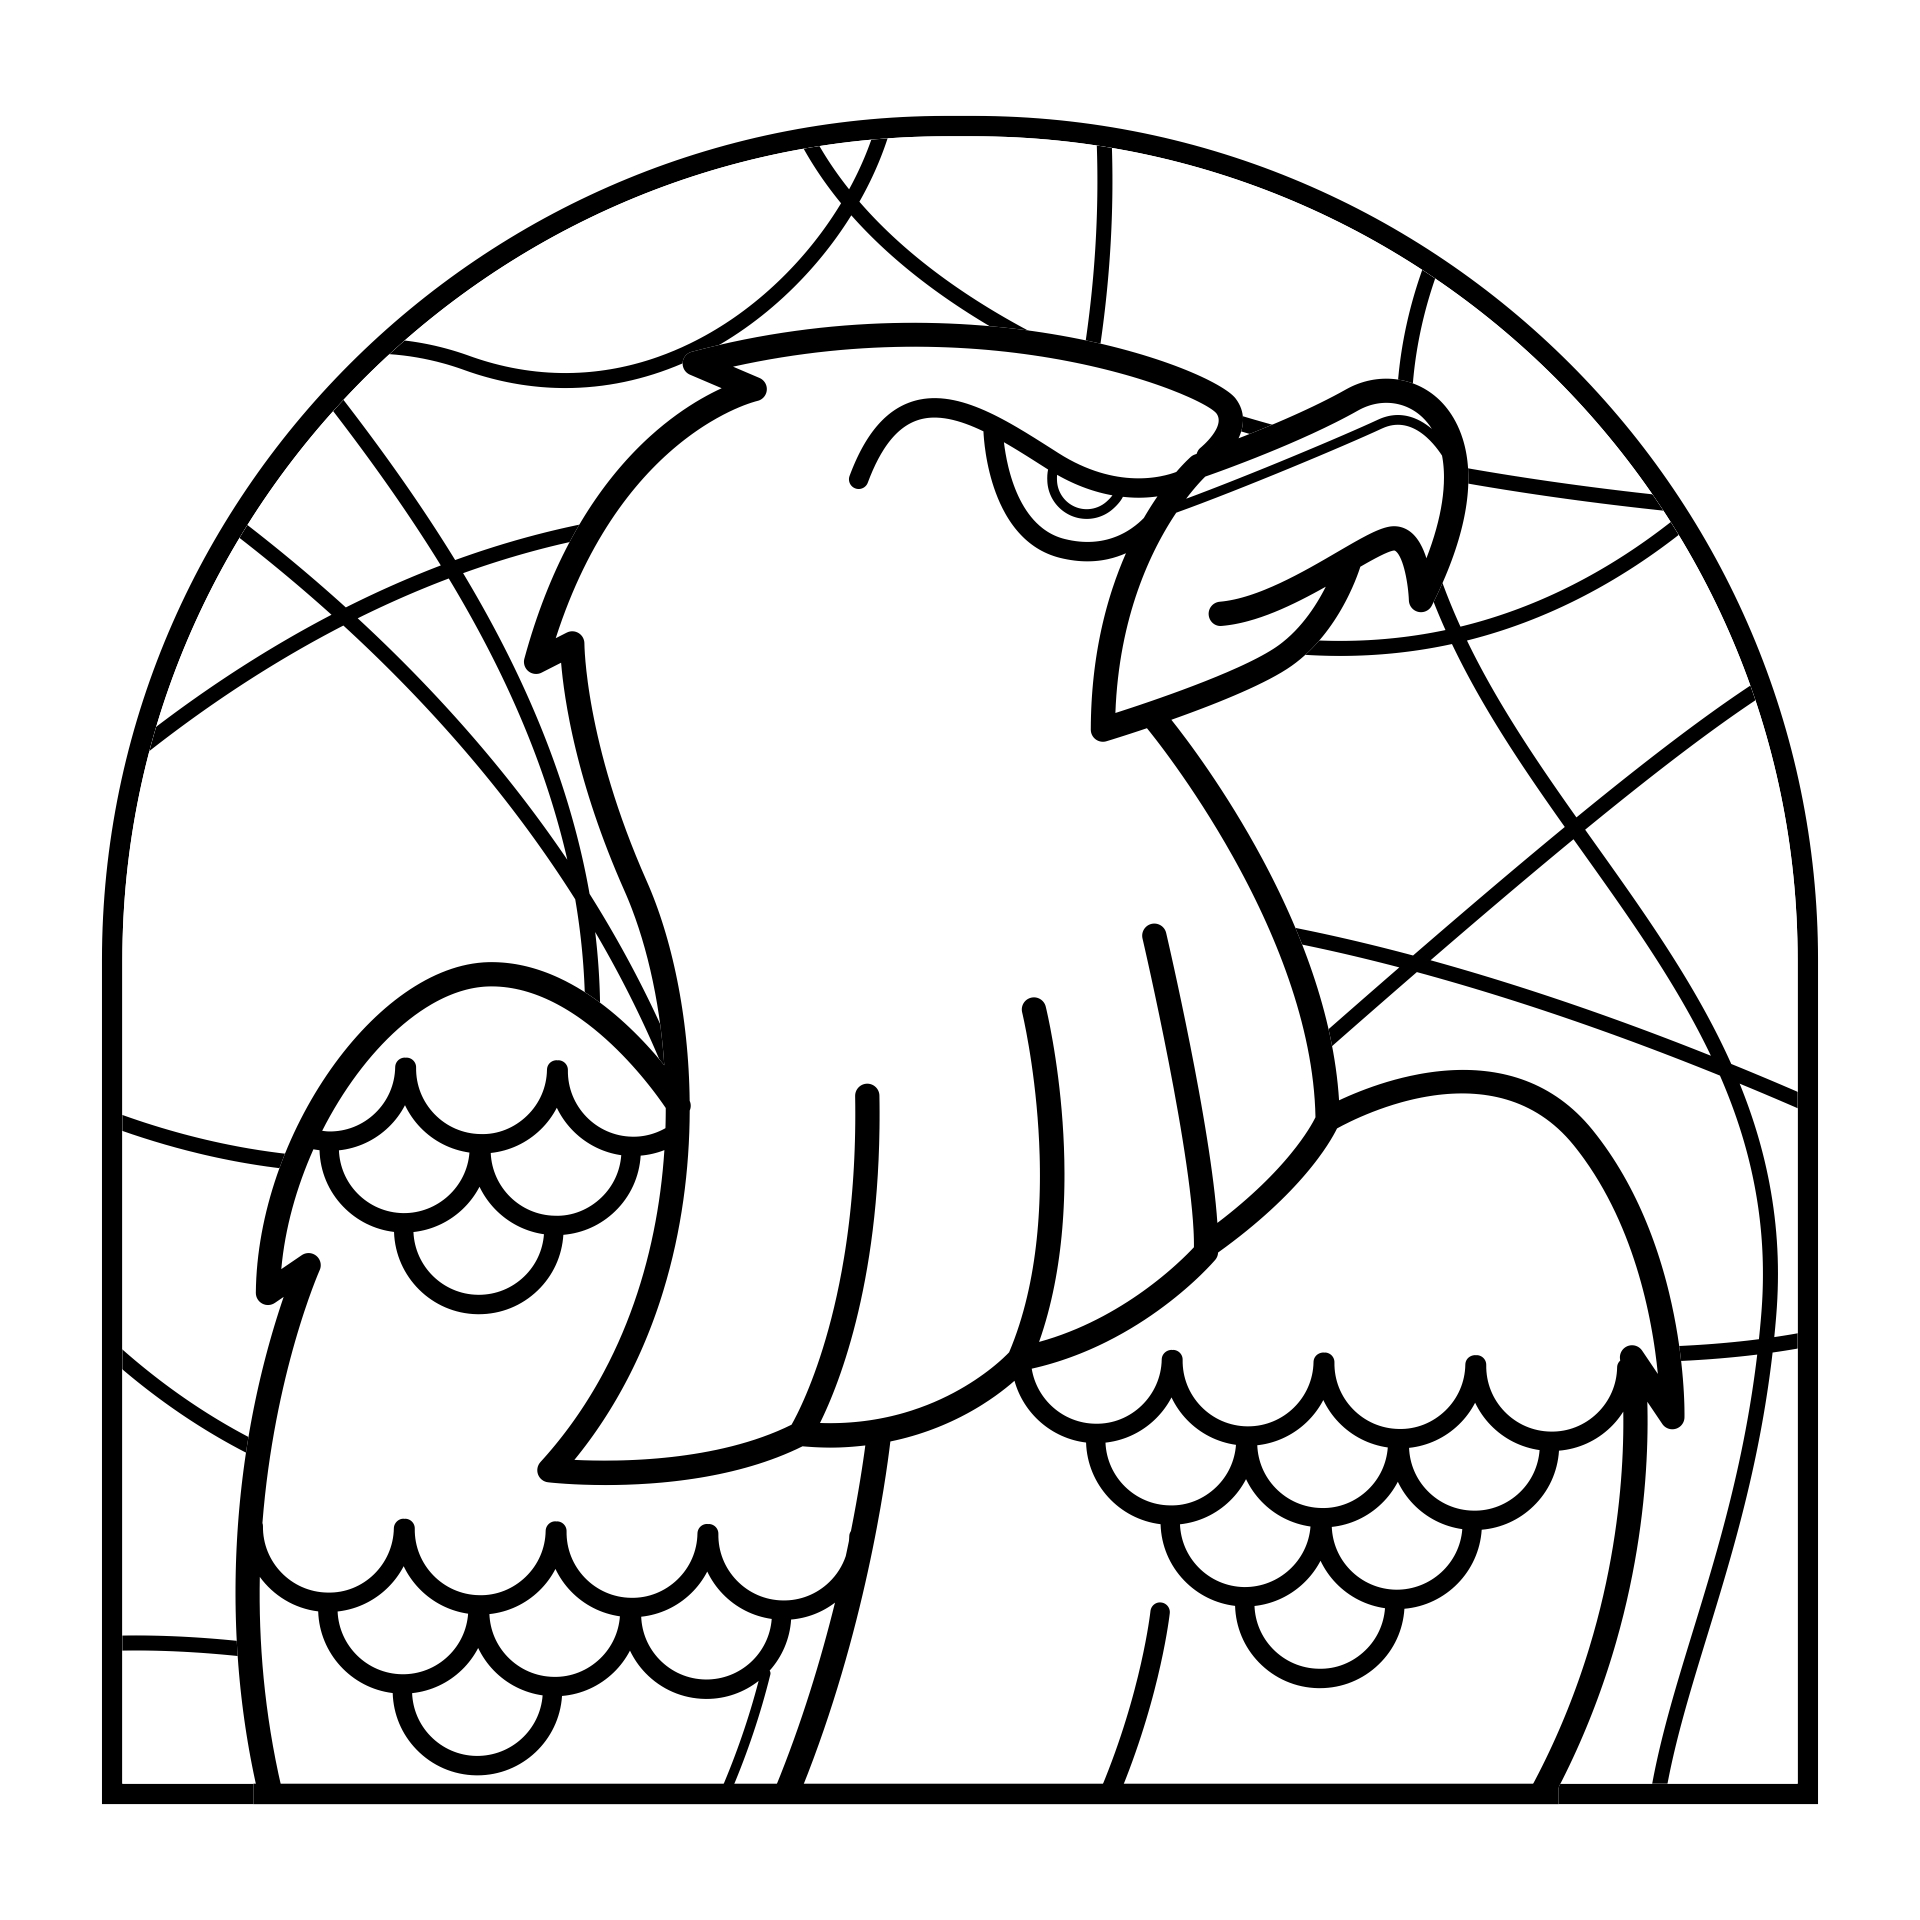 Printable Eagle Stained Glass Pattern